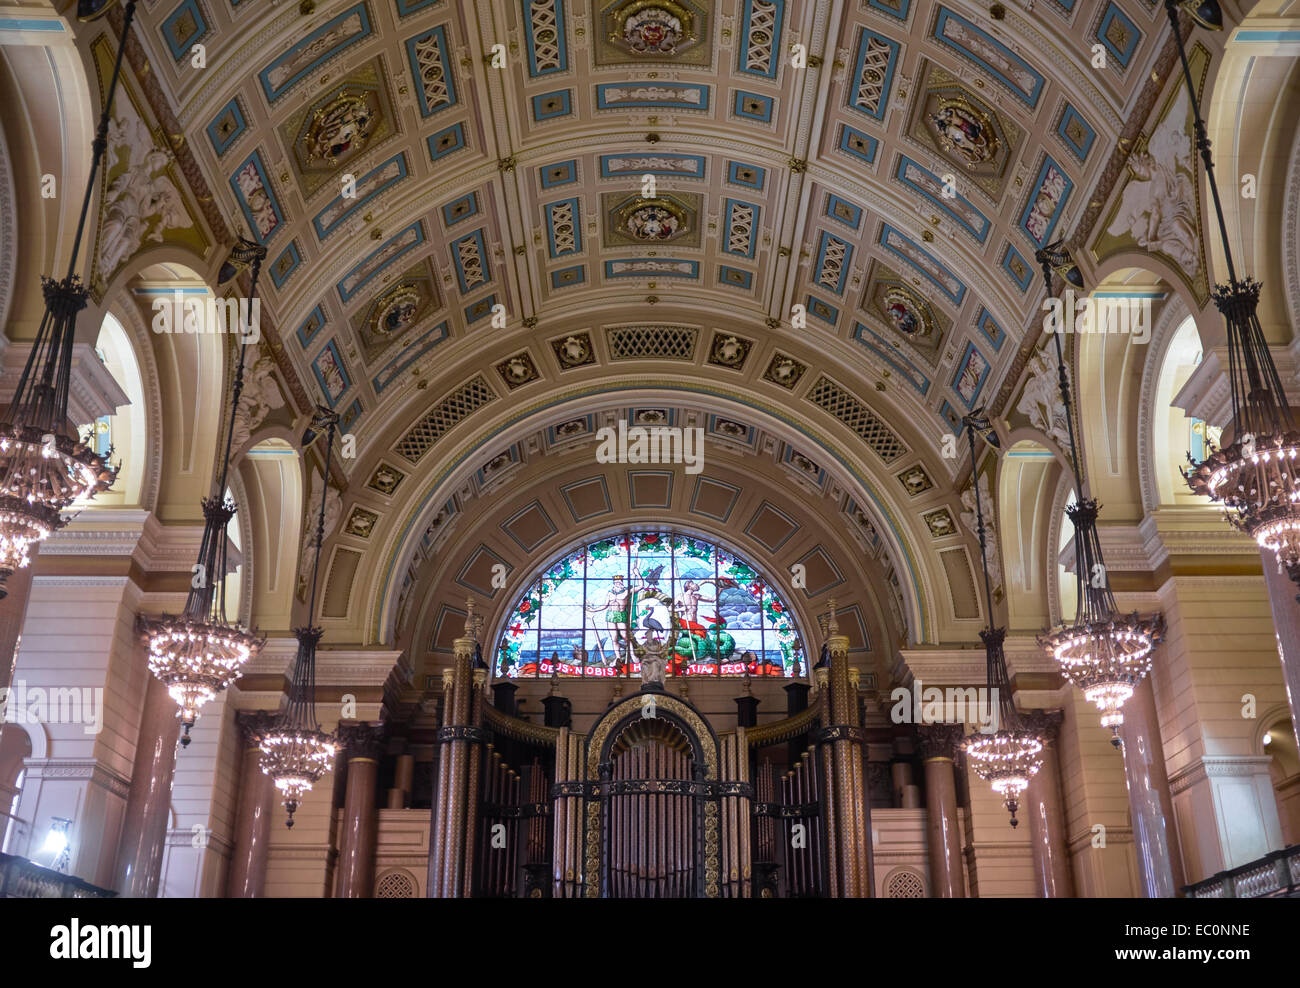 The decorative interior of St Georges Hall in Liverpool city centre UK Stock Photo